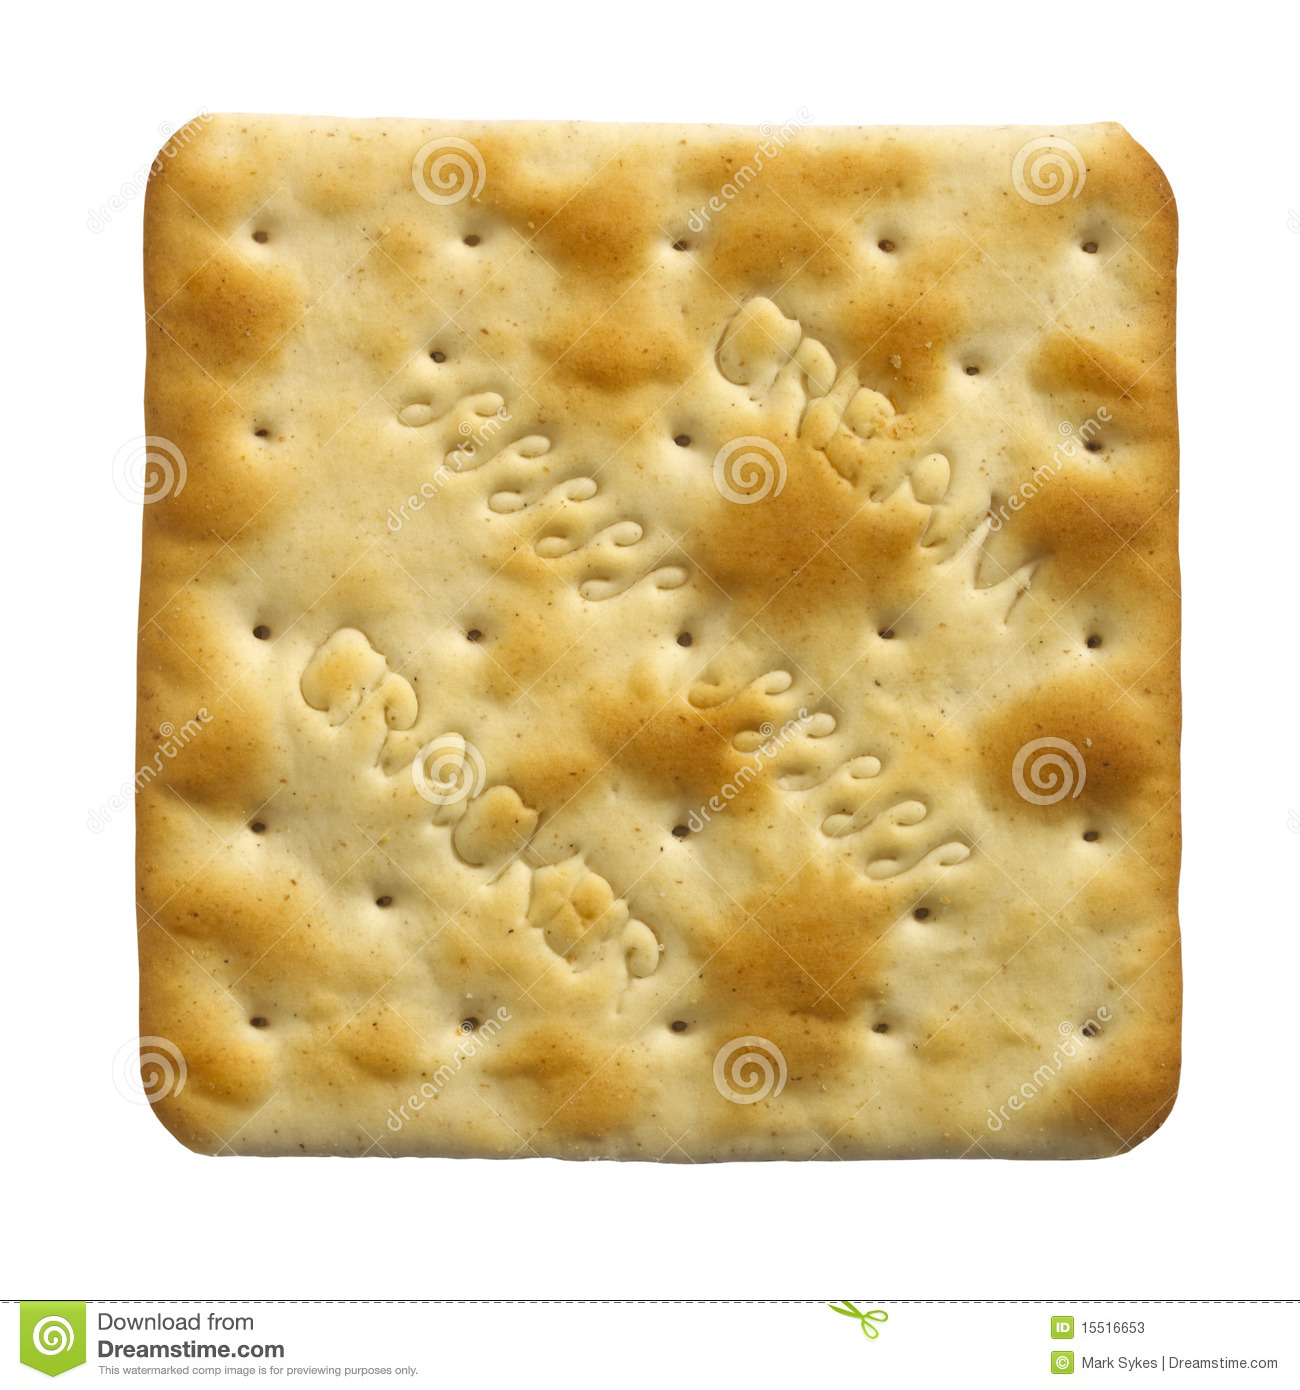 Single Cream Cracker Biscuit On White Background Stock Photos   Image